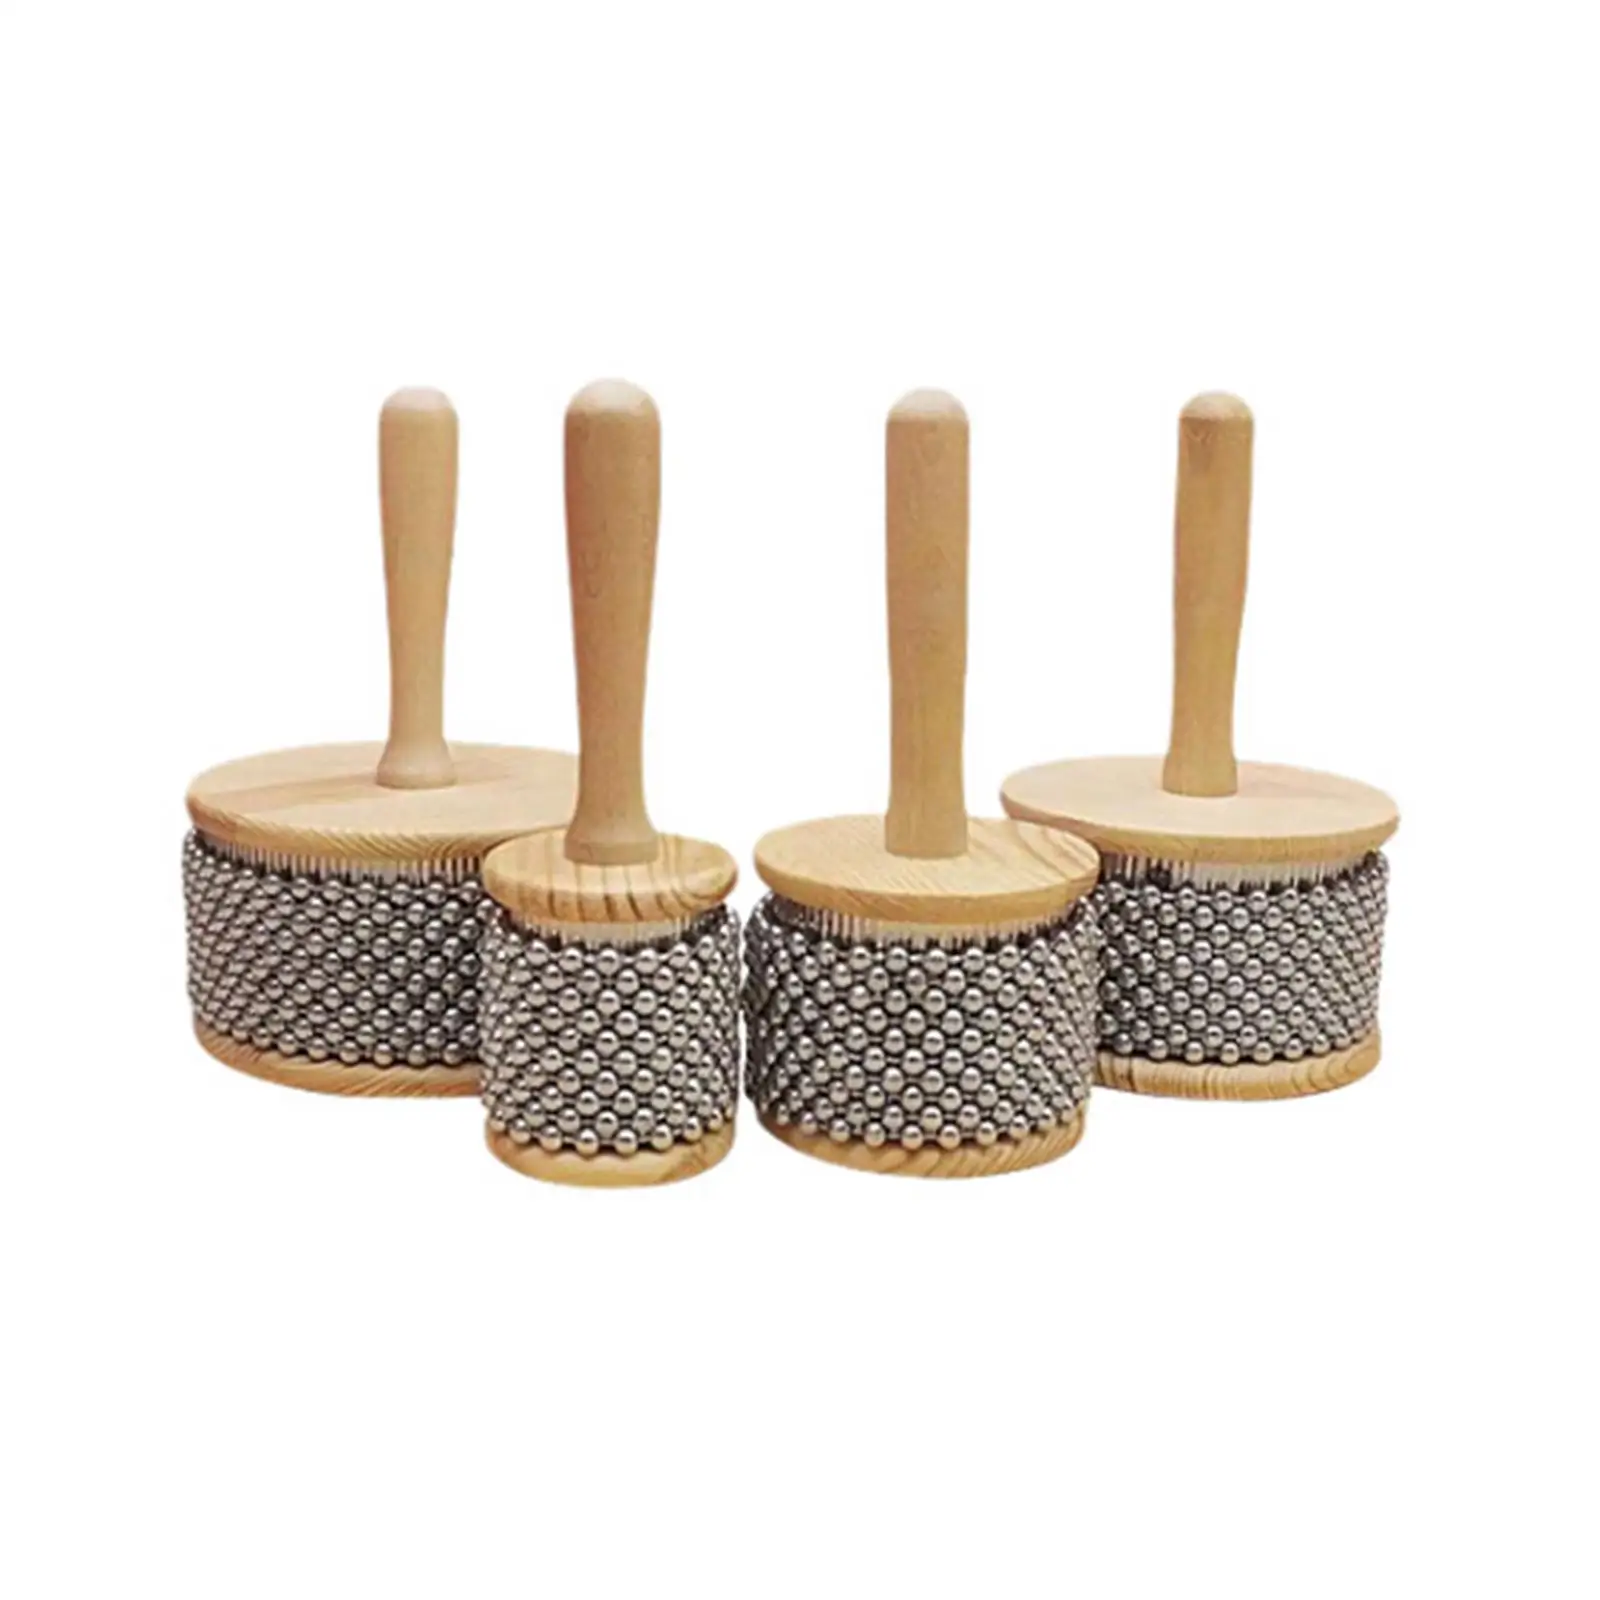 Wooden Hand Cabasa Kids Gift Hand Shaker with Metal Beads Cabasa Music Instrument for Music Education Playing at Home Classroom